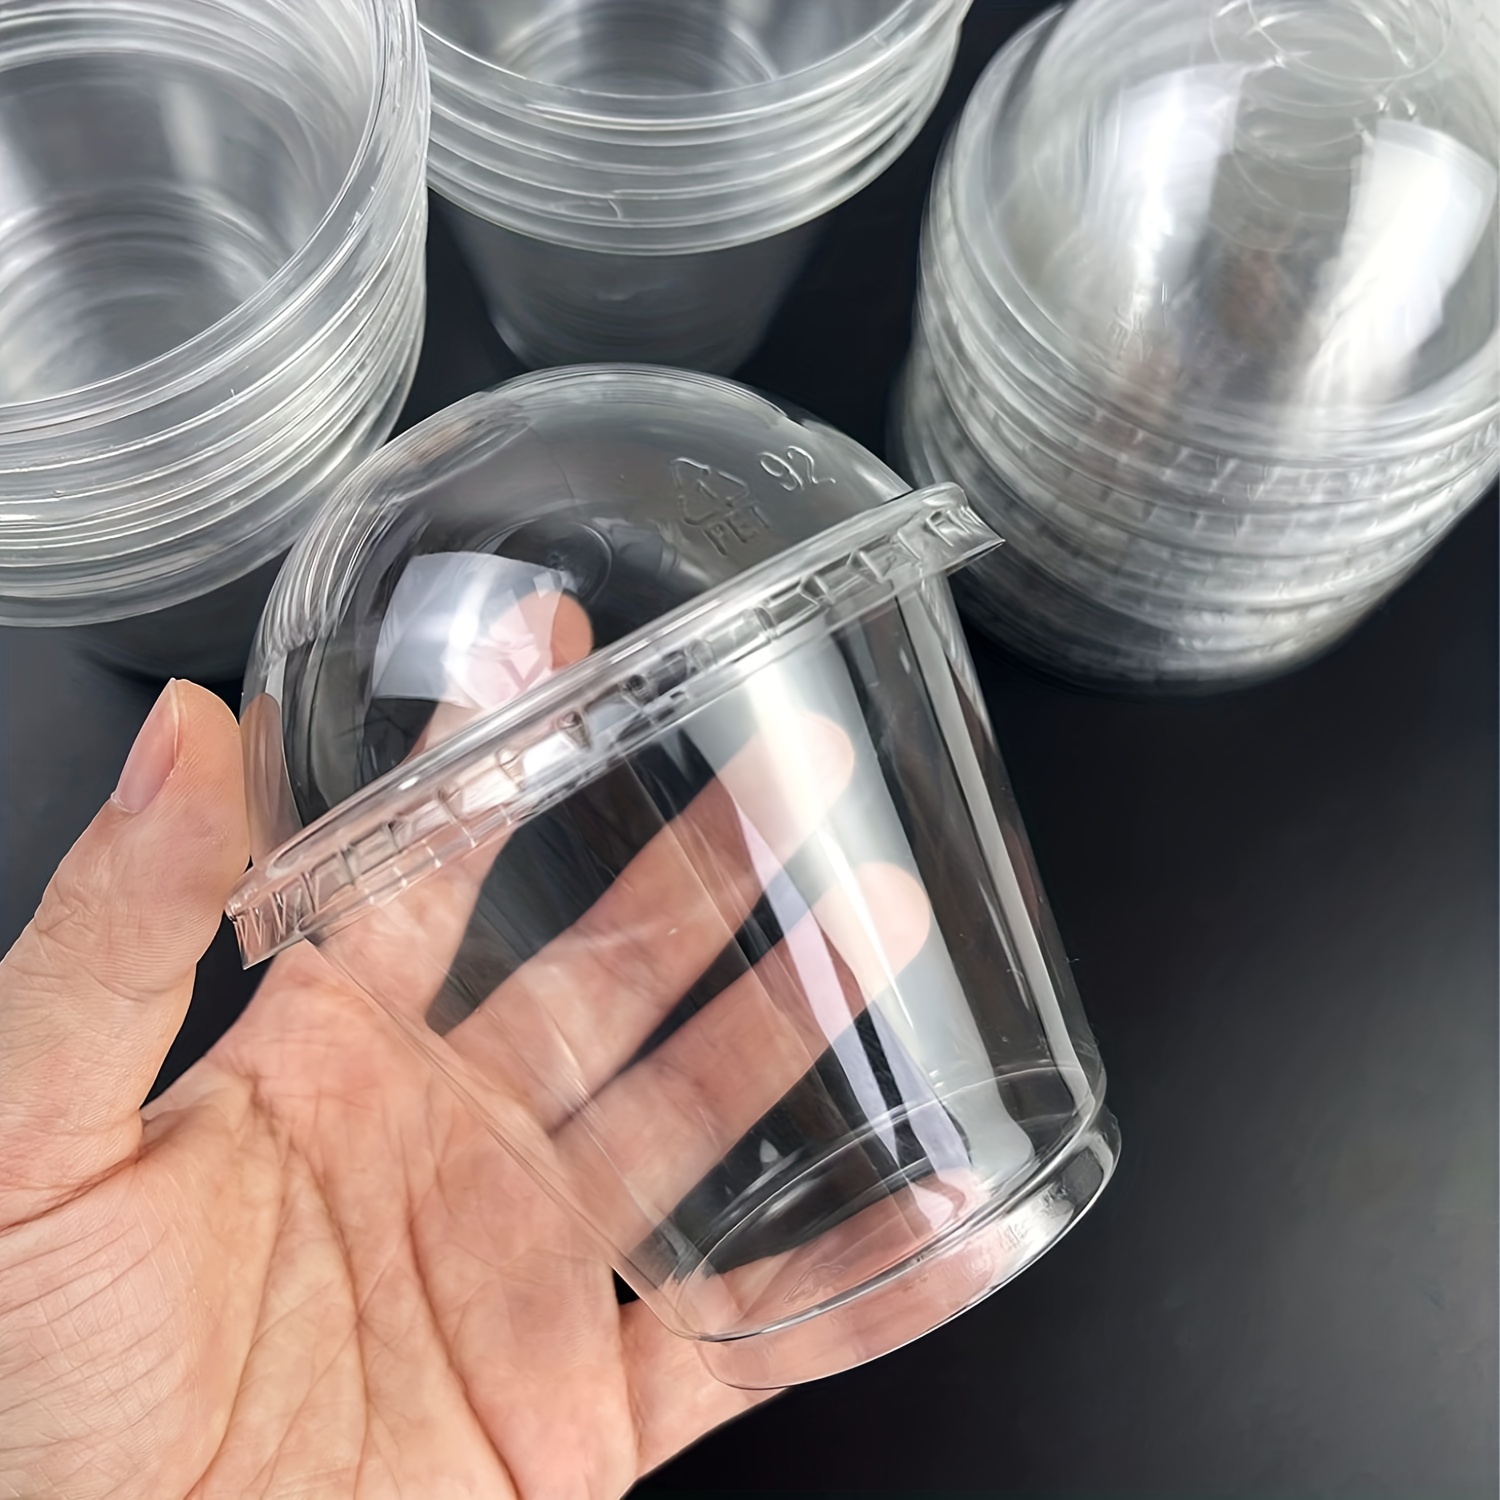 Plastic Cups, 9 oz, Disposable Cups, Plastic Wine Cups, Plastic  Cocktail Glasses, Plastic Drinking Cups, Bulk Party Cups, Wedding  Tumblers